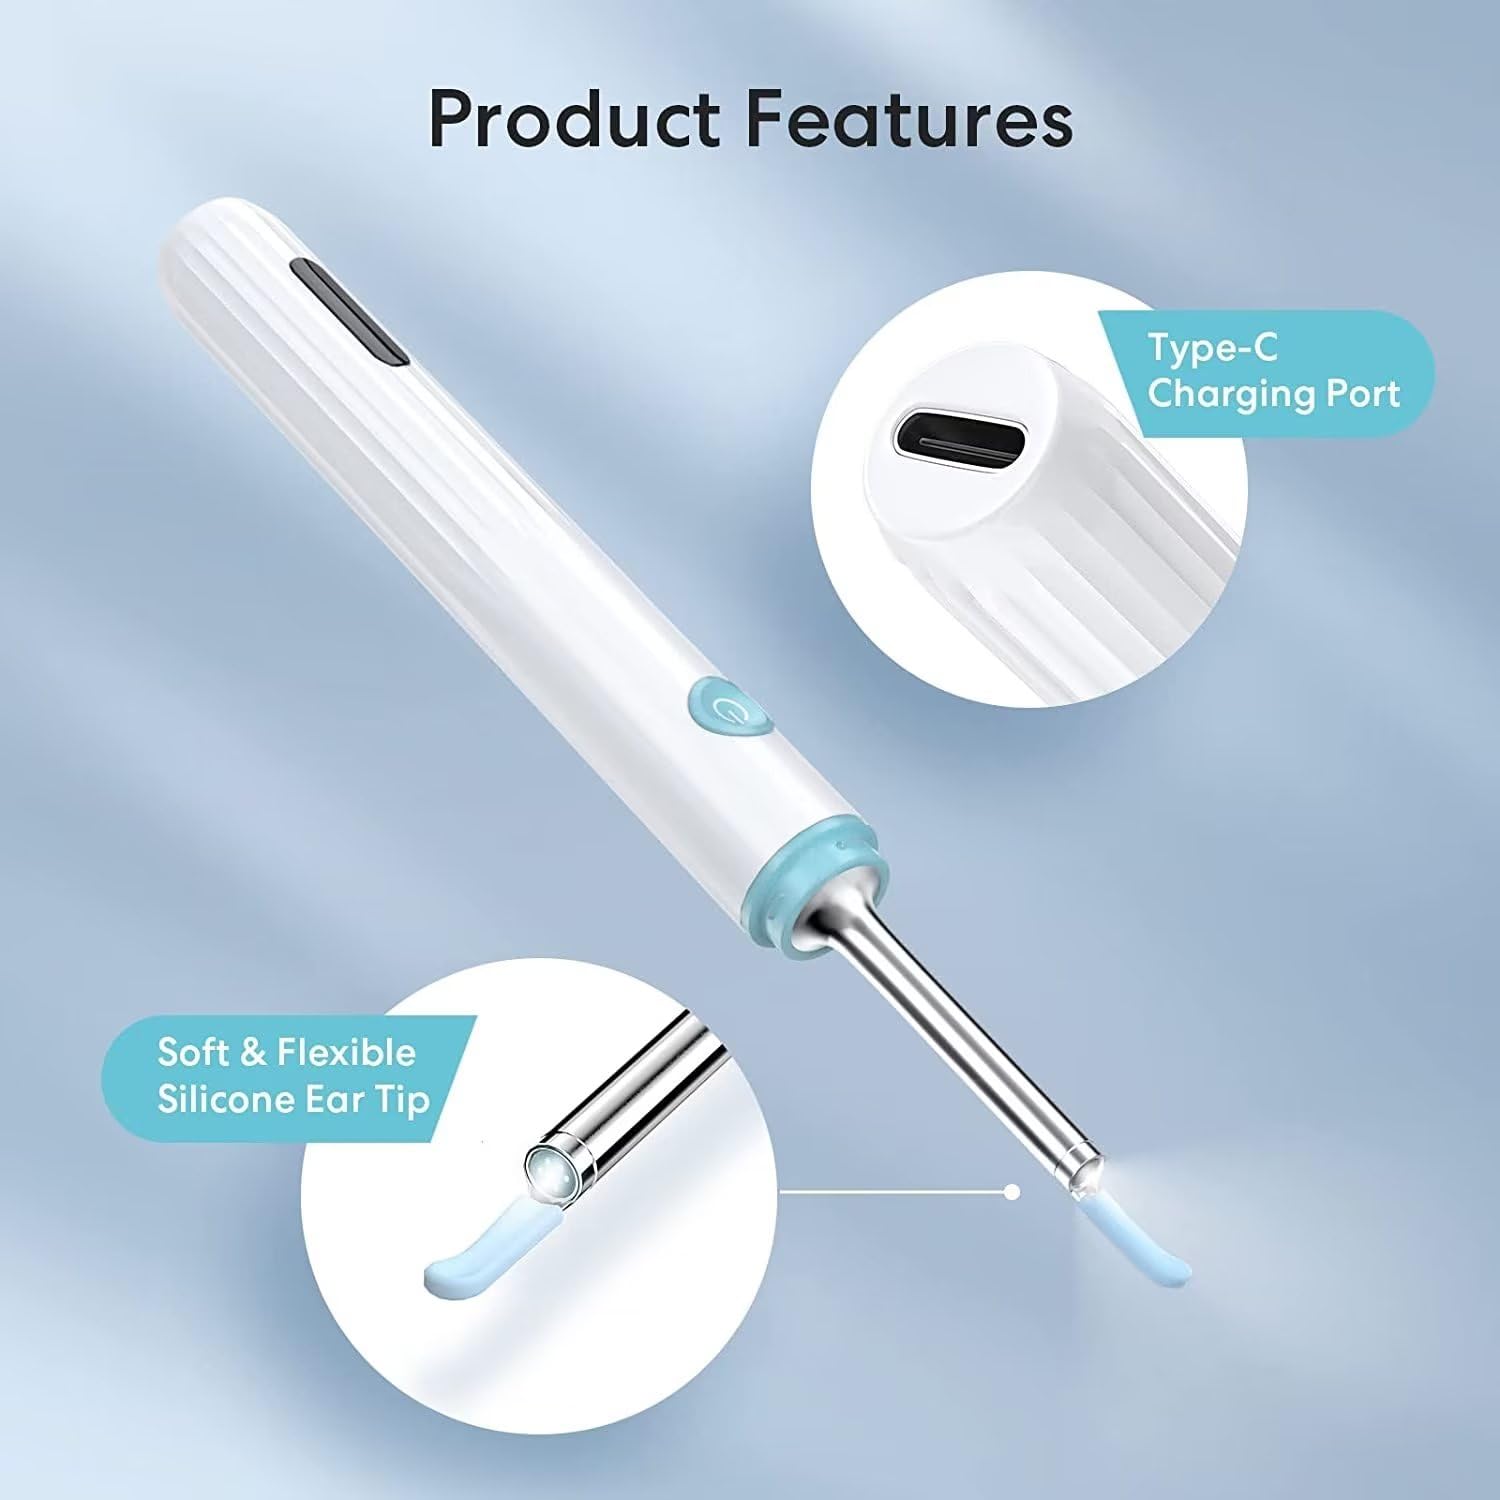 Ear Wax Removal, Ear Cleaner with Camera, Ear Wax Removal Tool with 1080P HD, Wireless Otoscope with Light, Ear Wax Removal Kit for iPhone, iPad, Android Phones